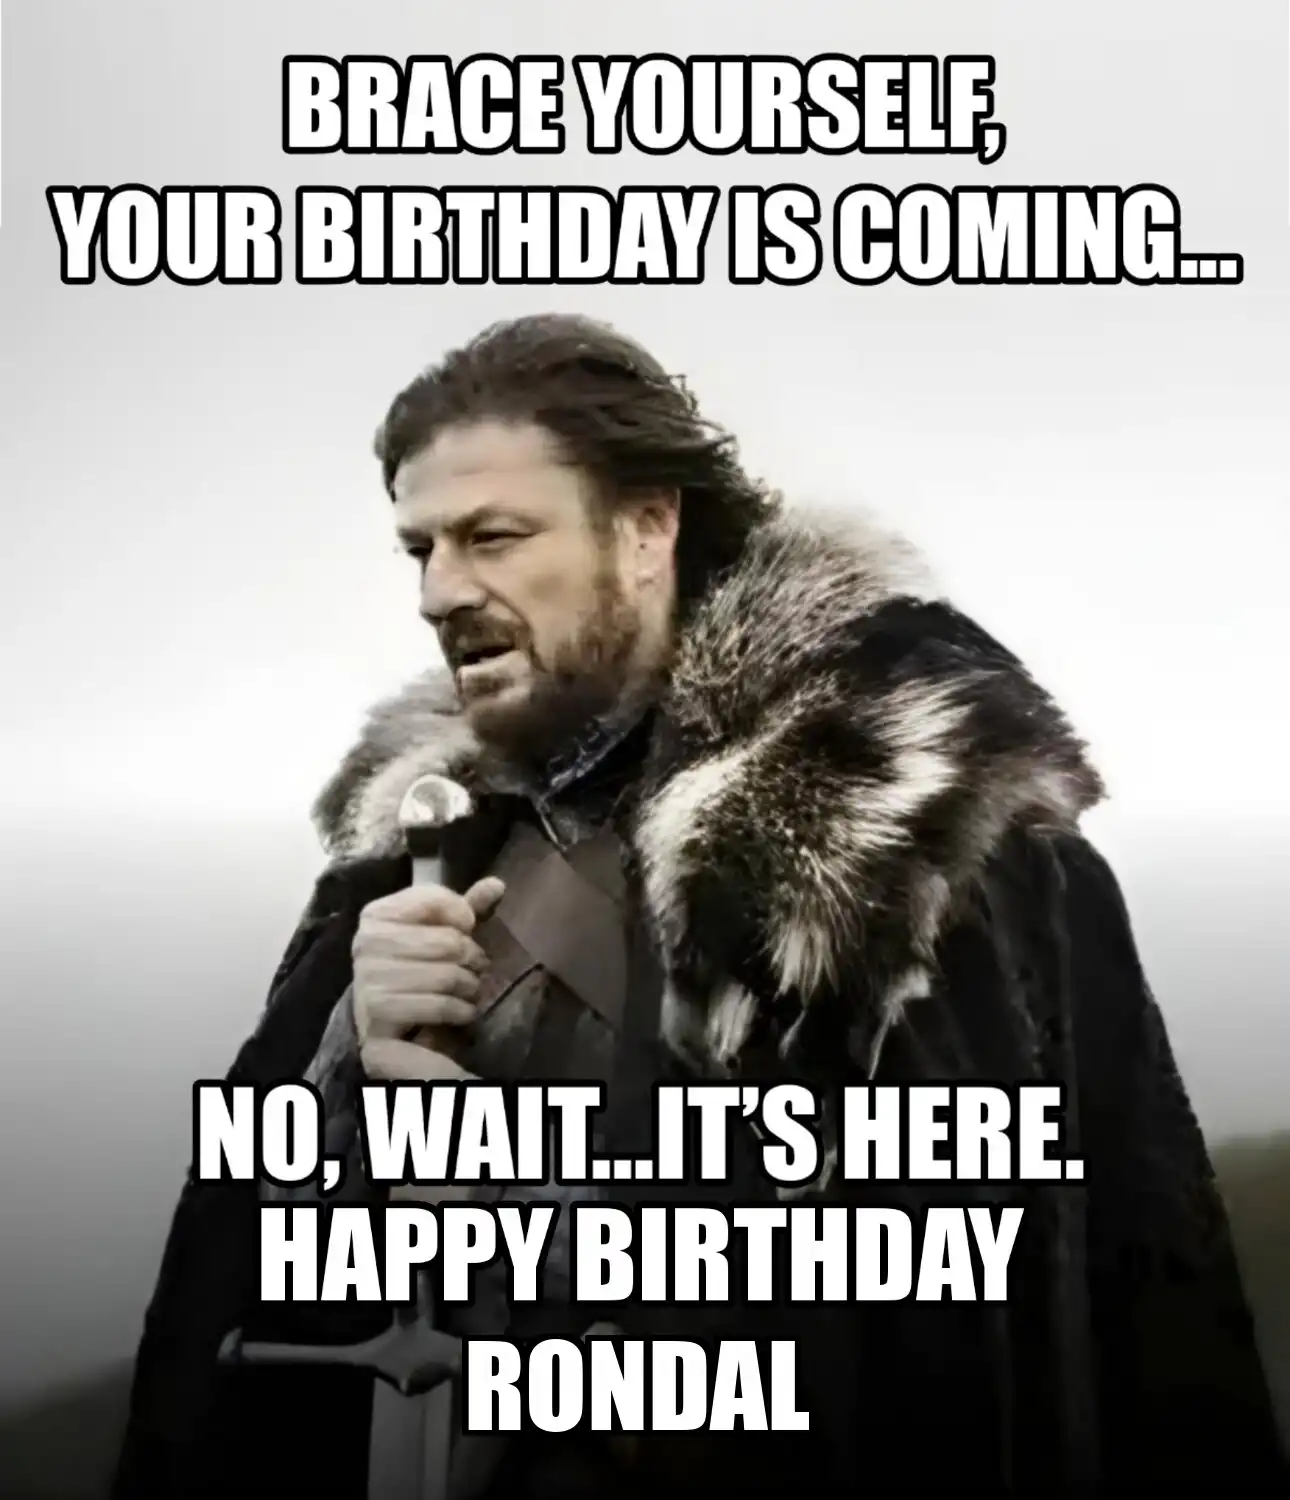 Happy Birthday Rondal Brace Yourself Your Birthday Is Coming Meme